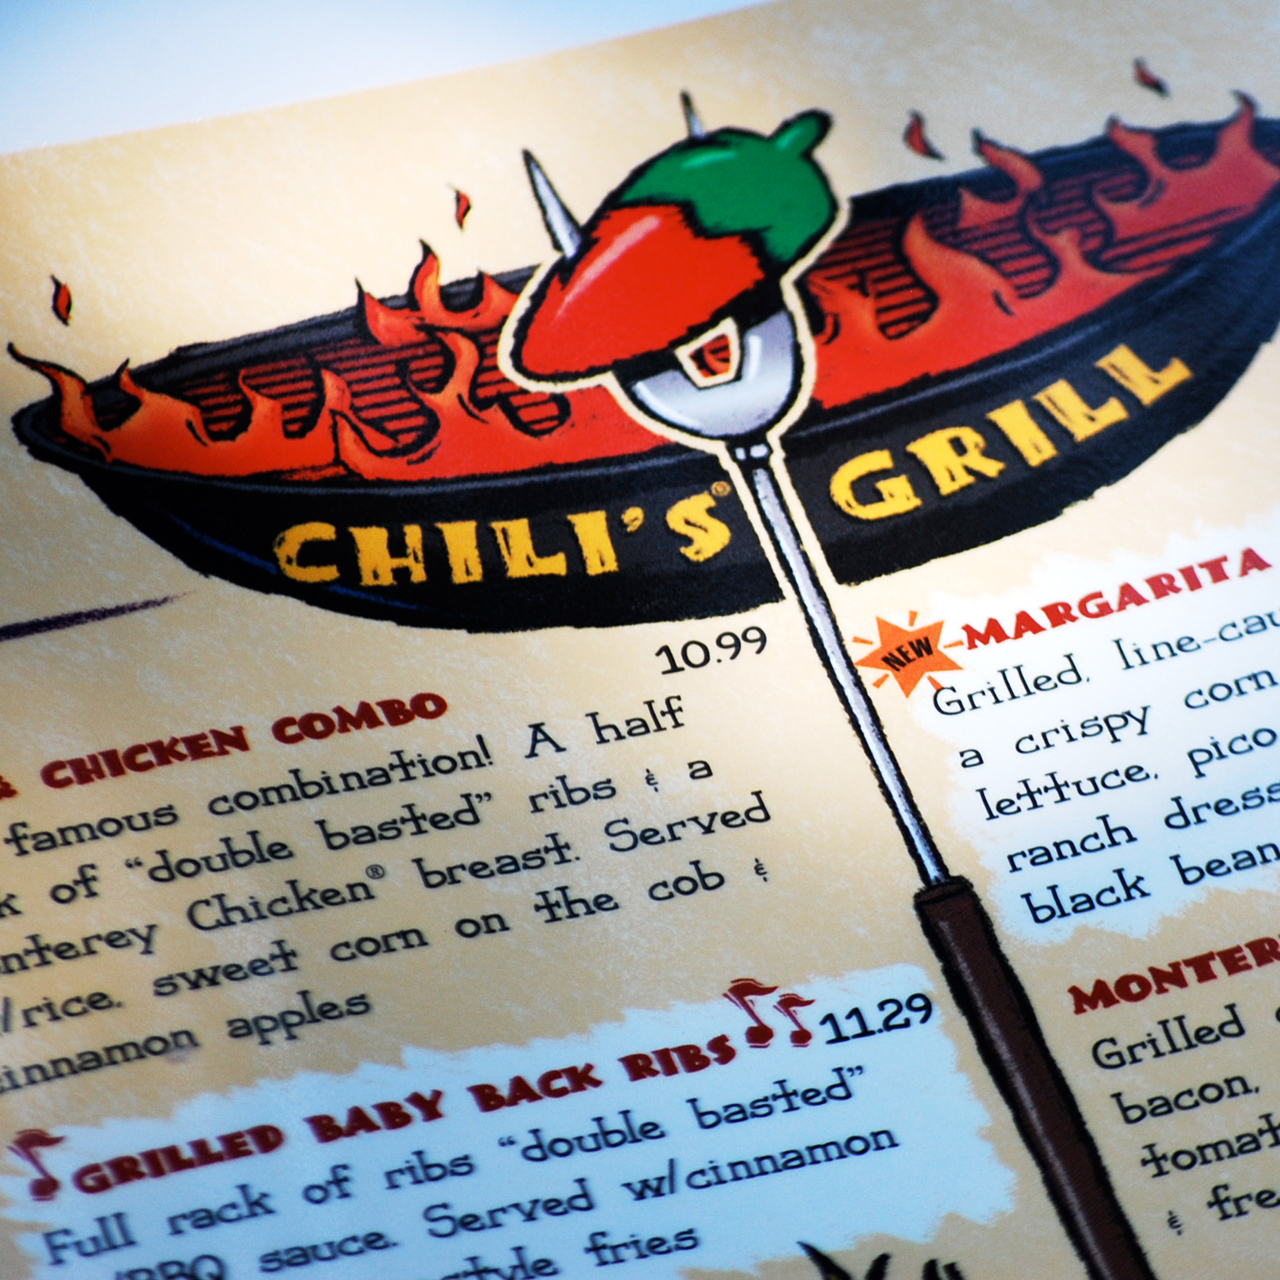 An image of the Chili's Grill logo design on the interior of the Chili's menu